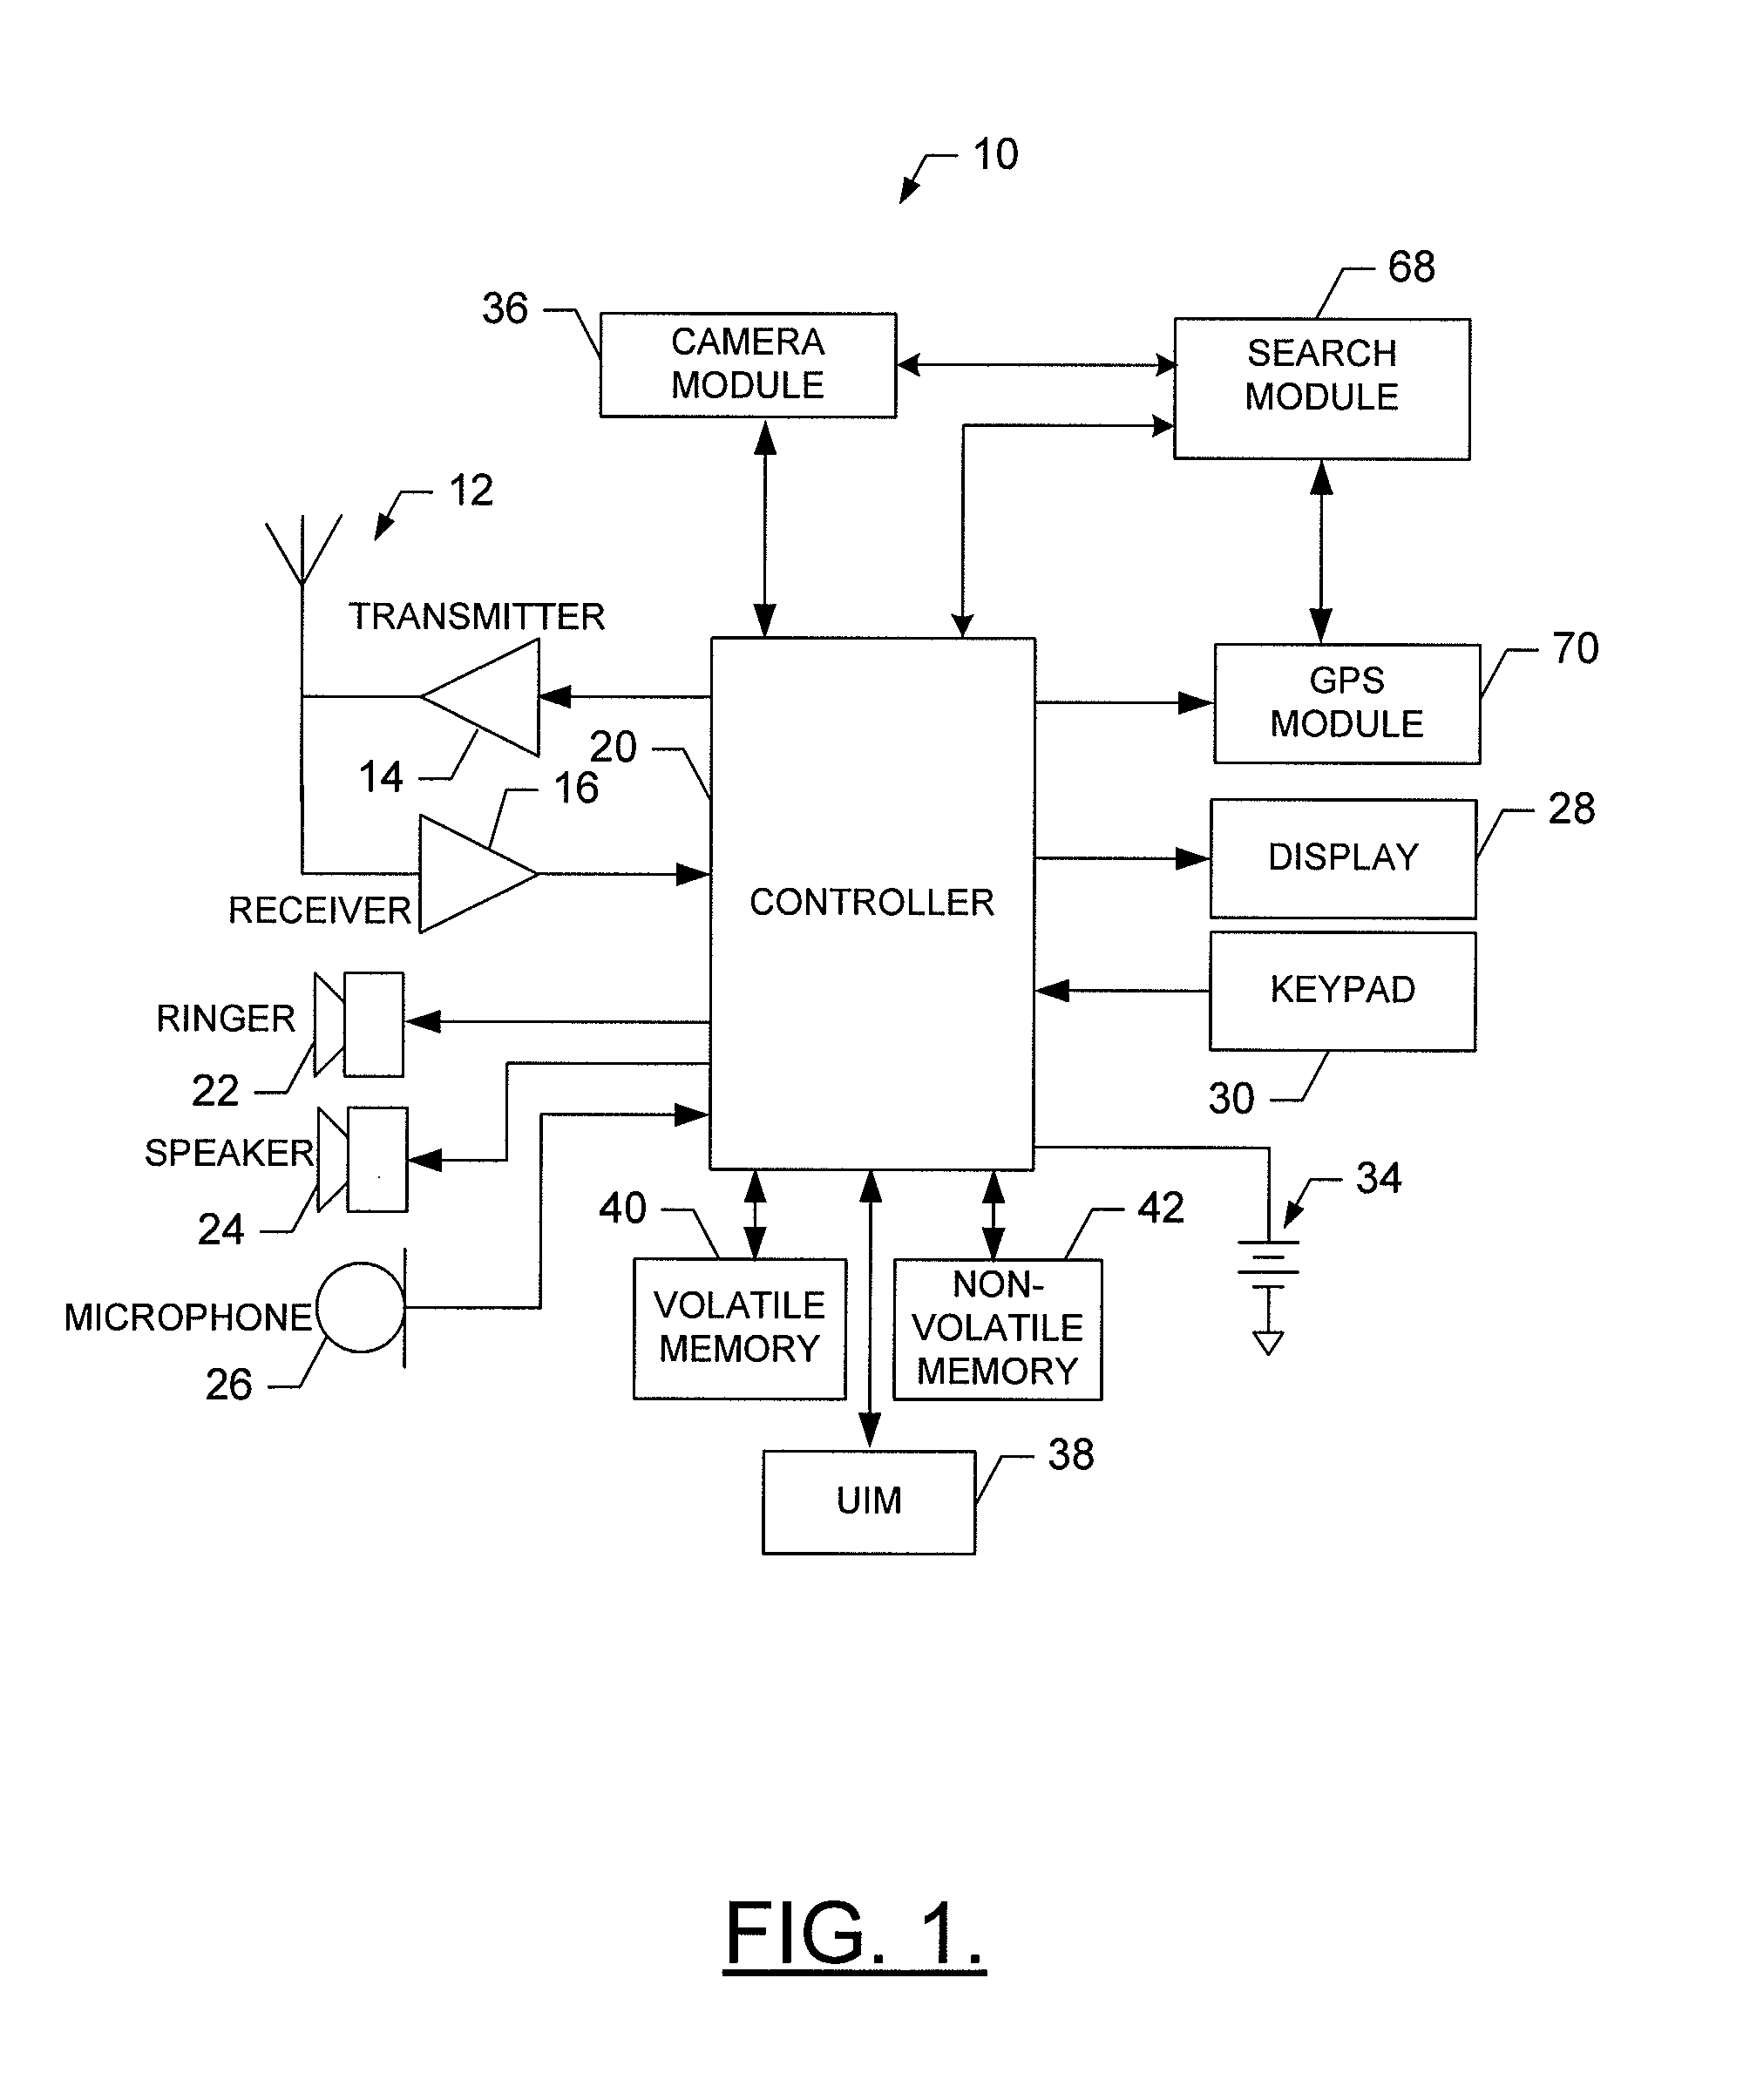 Method, device and computer program product for integrating code-based and optical character recognition technologies into a mobile visual search